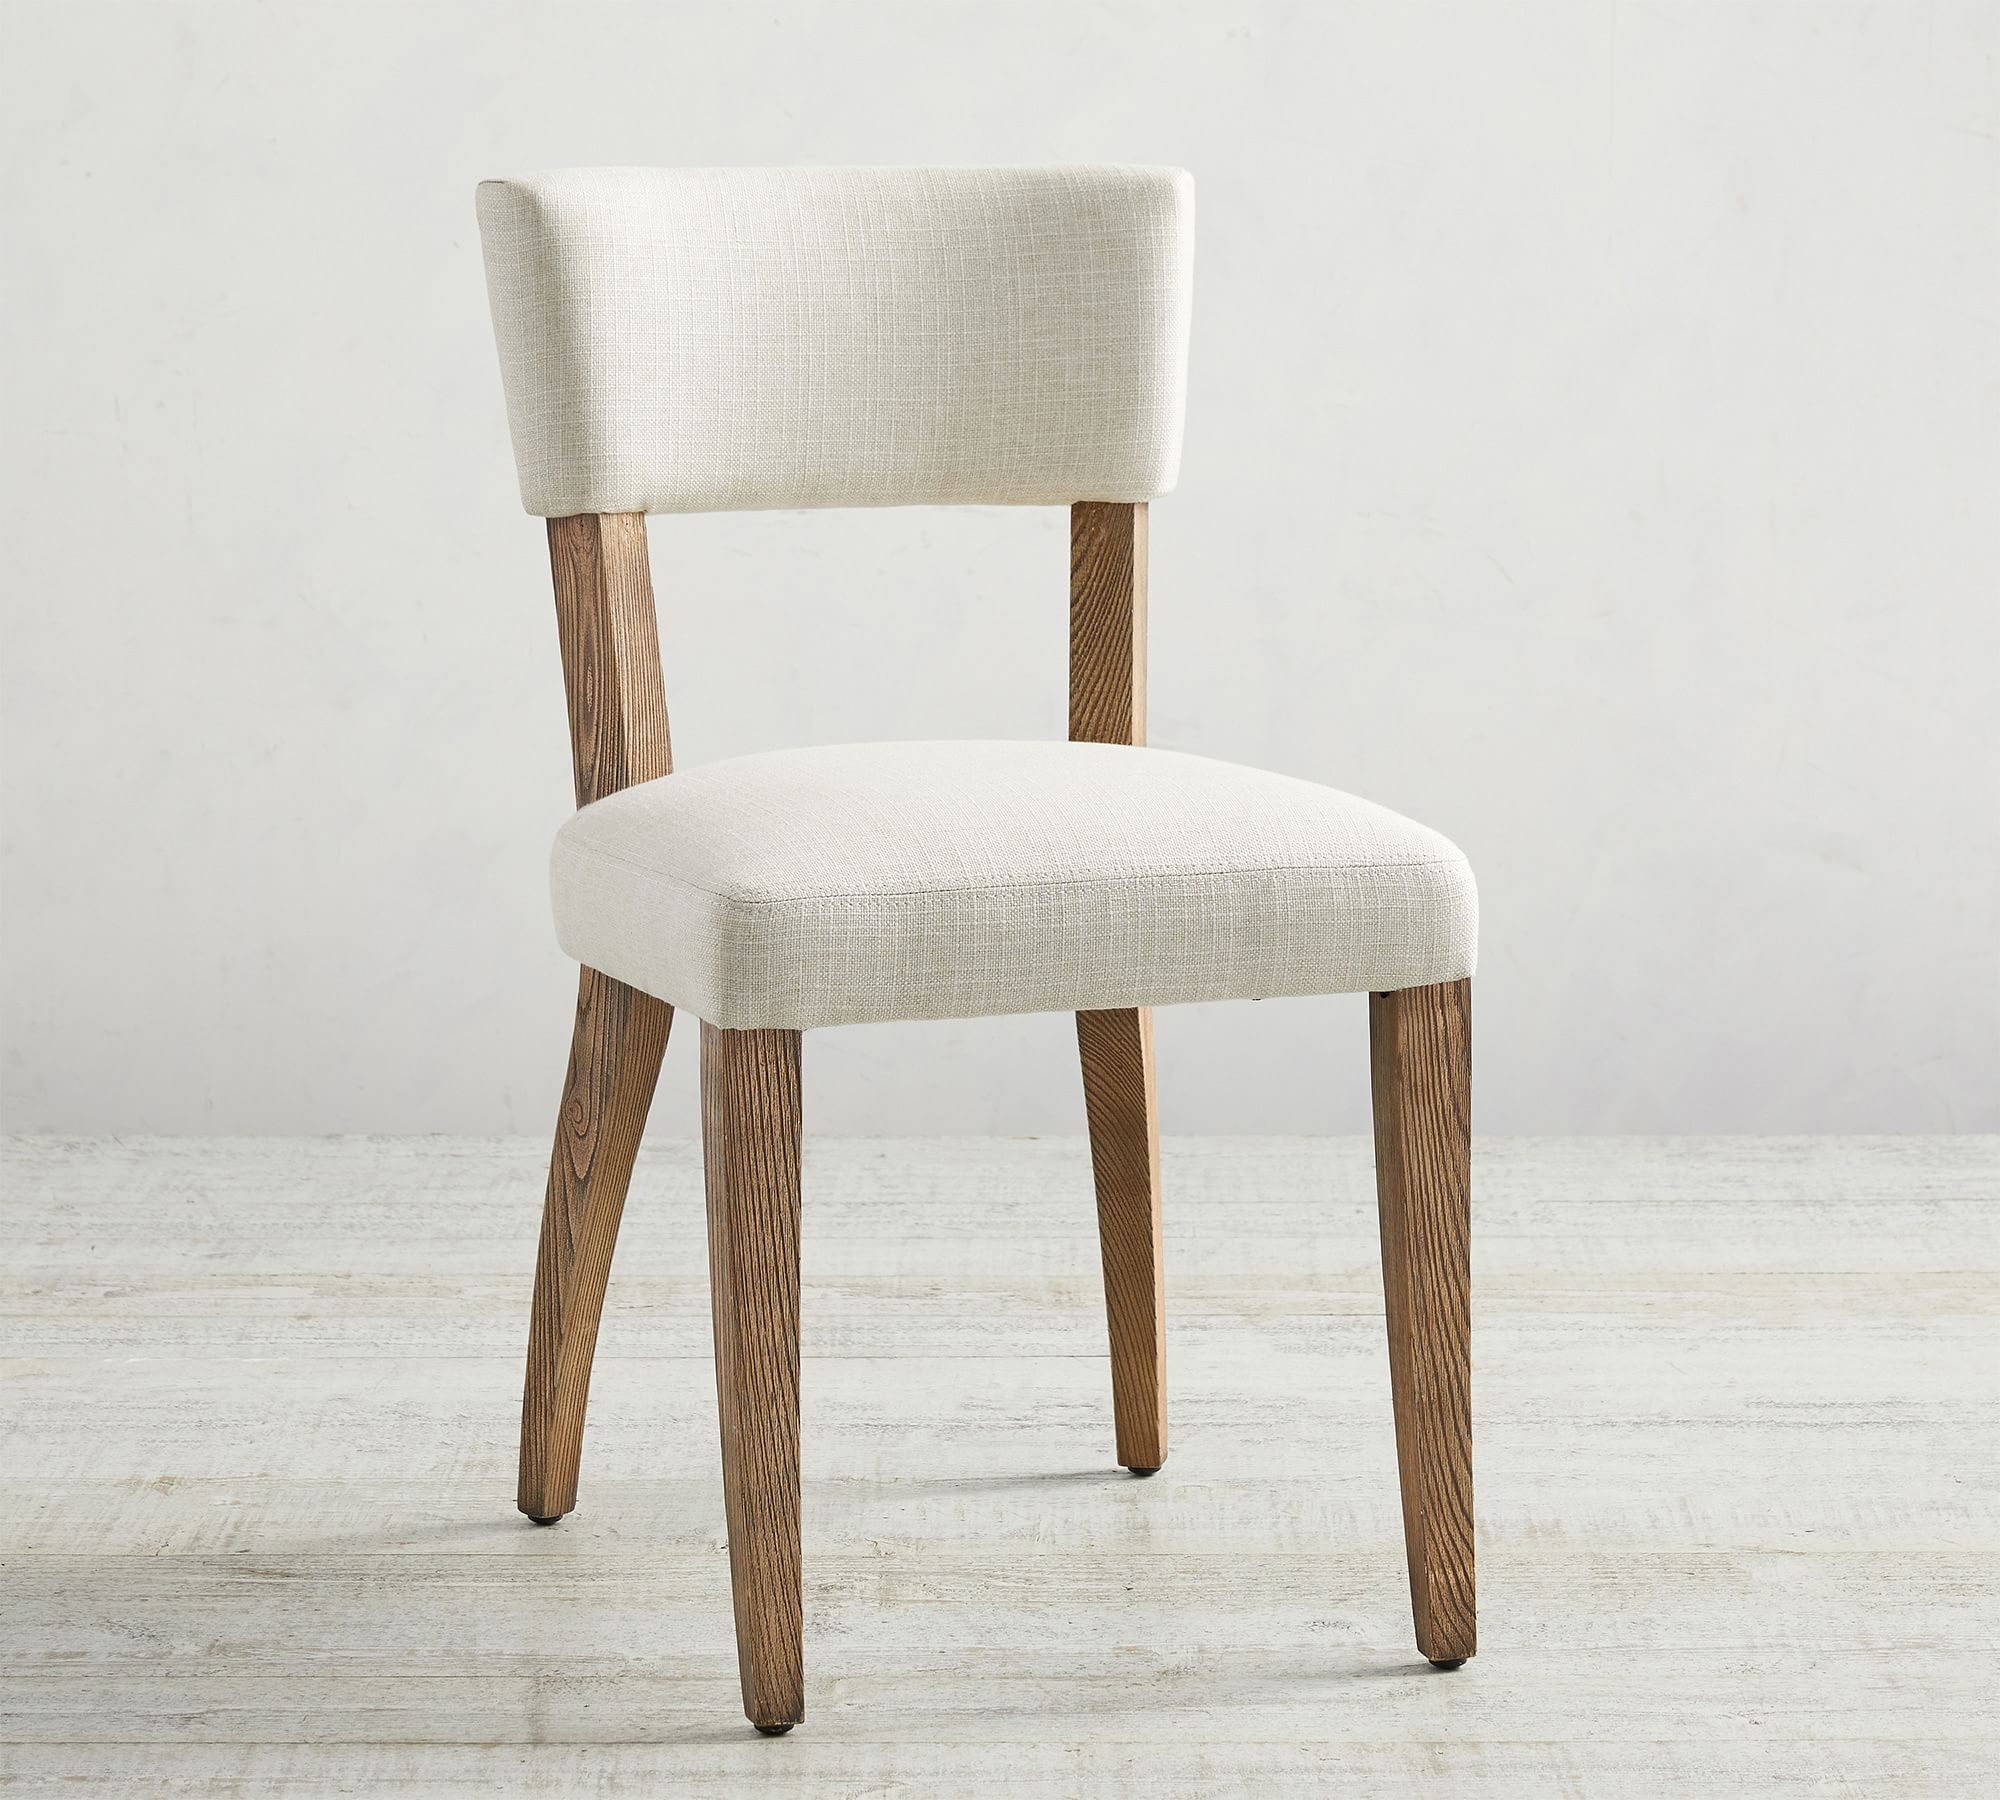 Payson Upholstered Dining Chair Ecomm Via Potterybarn ?fit=700%2C630